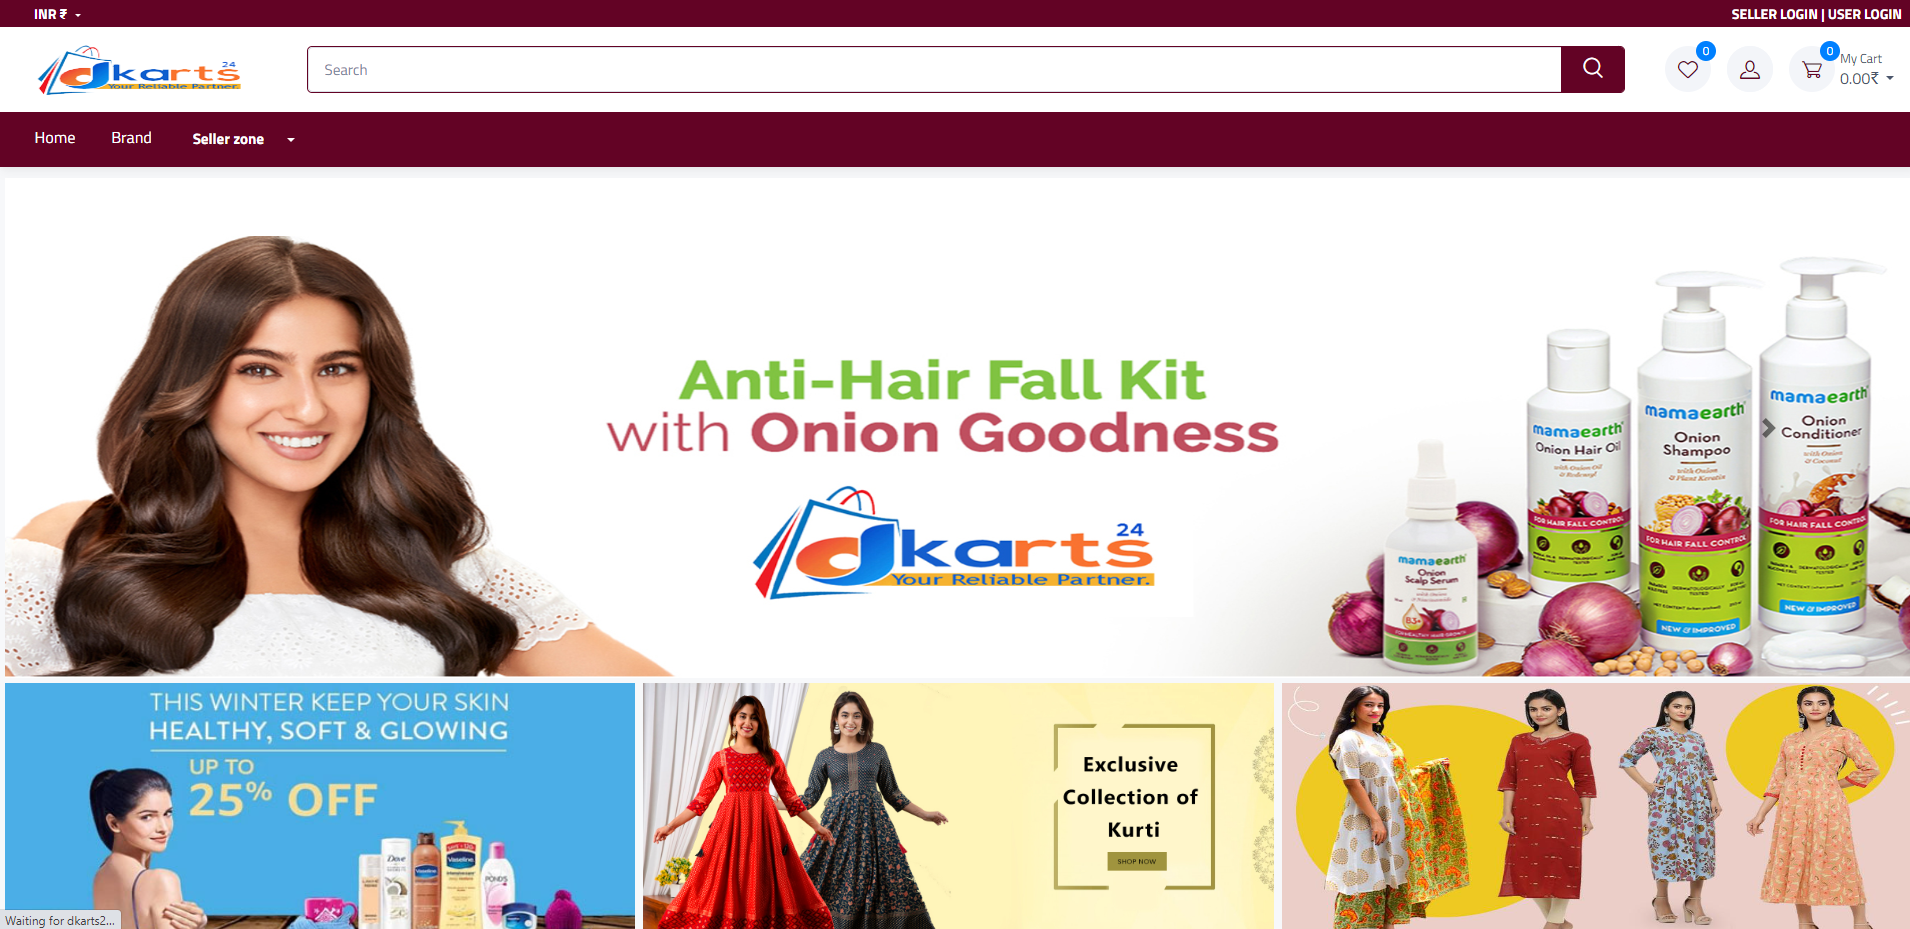 La

  
    
 

Anti-Hair Fall Kit
with Onion Goodness Ee

an
(Irs

Your Reliable Partner.

mamaearth

| mamaearth

 

   

Onion
Shampoo

THIS WINTER KEEP YOUR SKIN
HEALTHY, SOFT &amp; GLOWING ¥ pr

 
   
 
  

UPTO Exclusive
Ey ri OFF | Collection of
9 Kurti
L : fm